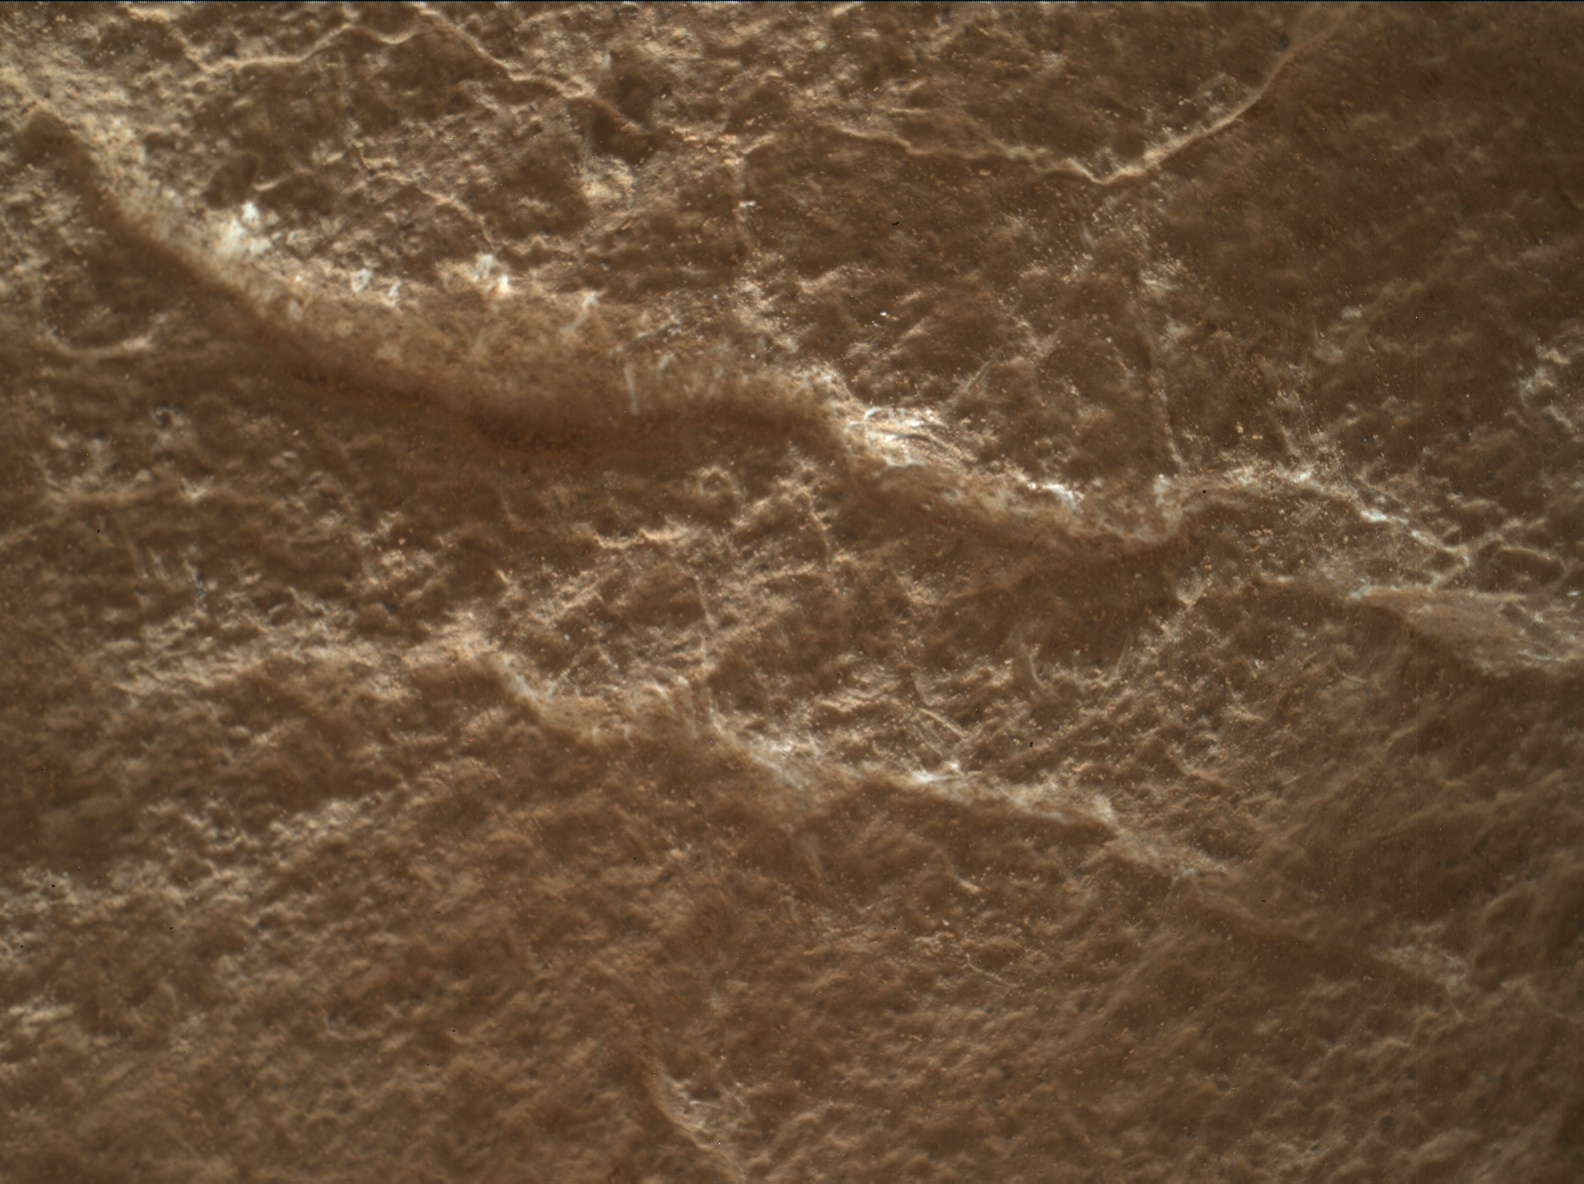 Nasa's Mars rover Curiosity acquired this image using its Mars Hand Lens Imager (MAHLI) on Sol 3657